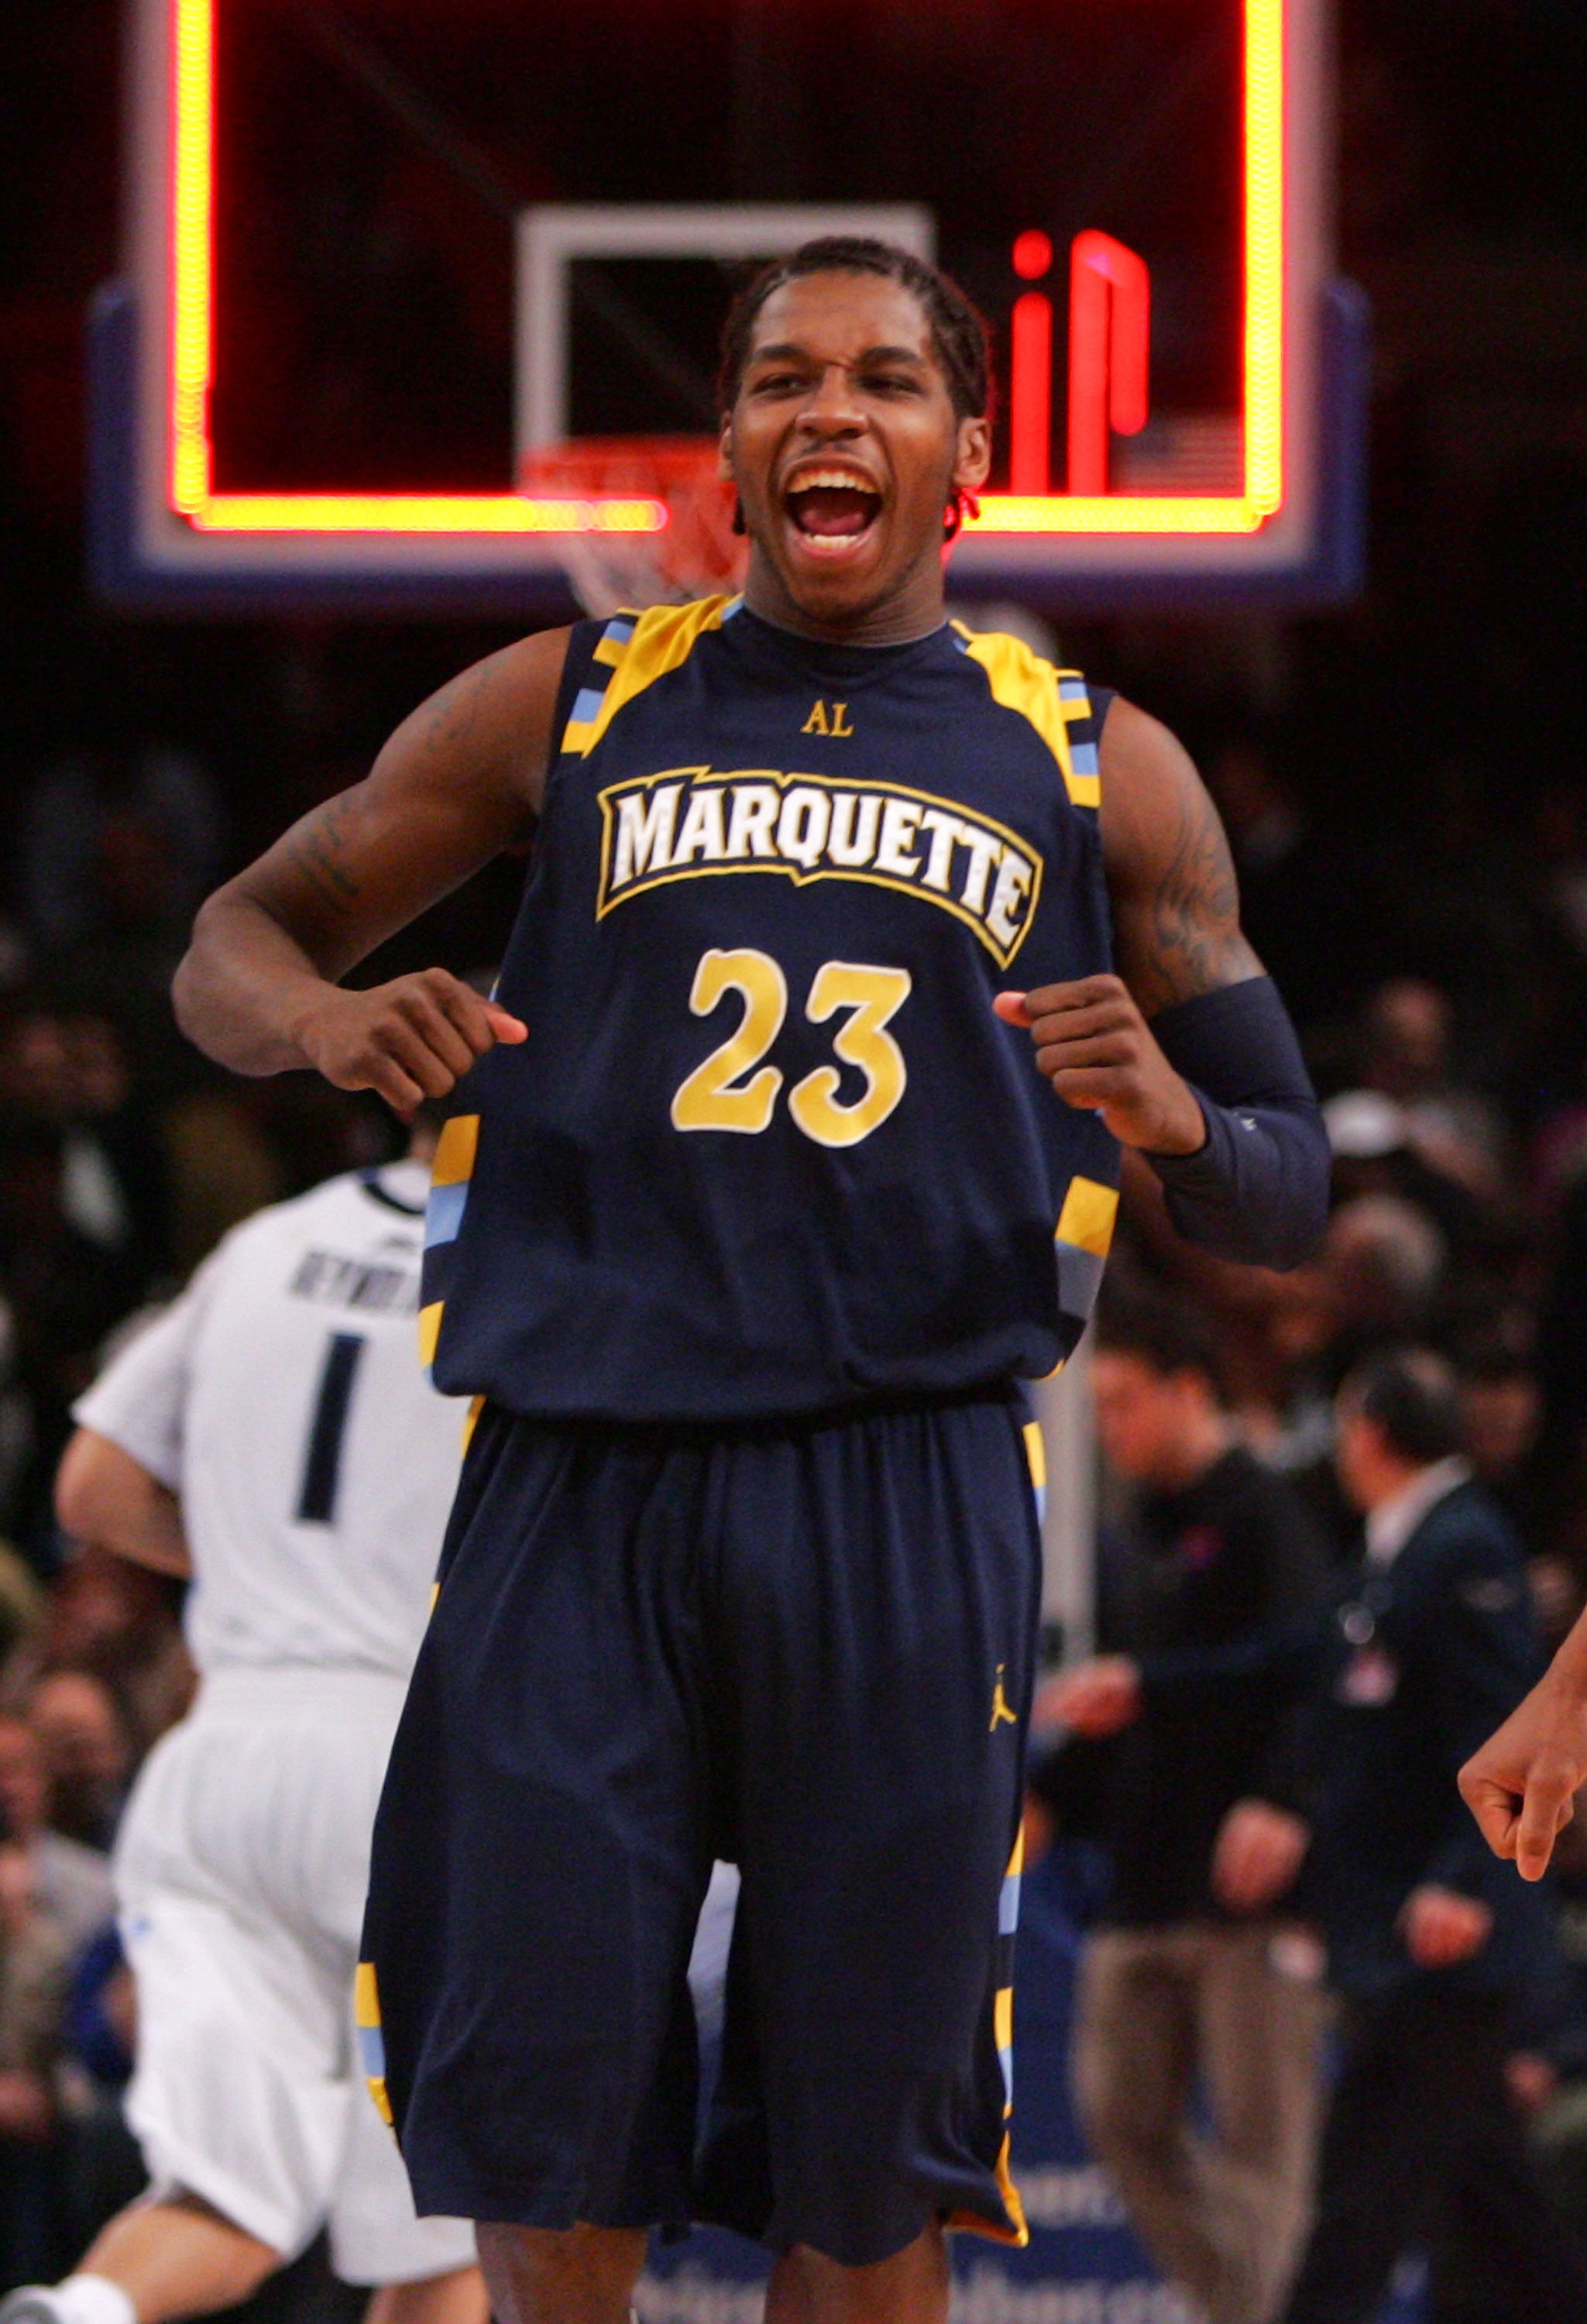 NEW YORK - MARCH 11: Dwight Buycks #23 of the Marquette Golden Eagles celebrates after defeating the Villanova Wildcats during the quarterfinal of the 2010 NCAA Big East Tournament at Madison Square Garden on March 11, 2010 in New York City.  (Photo by Ch